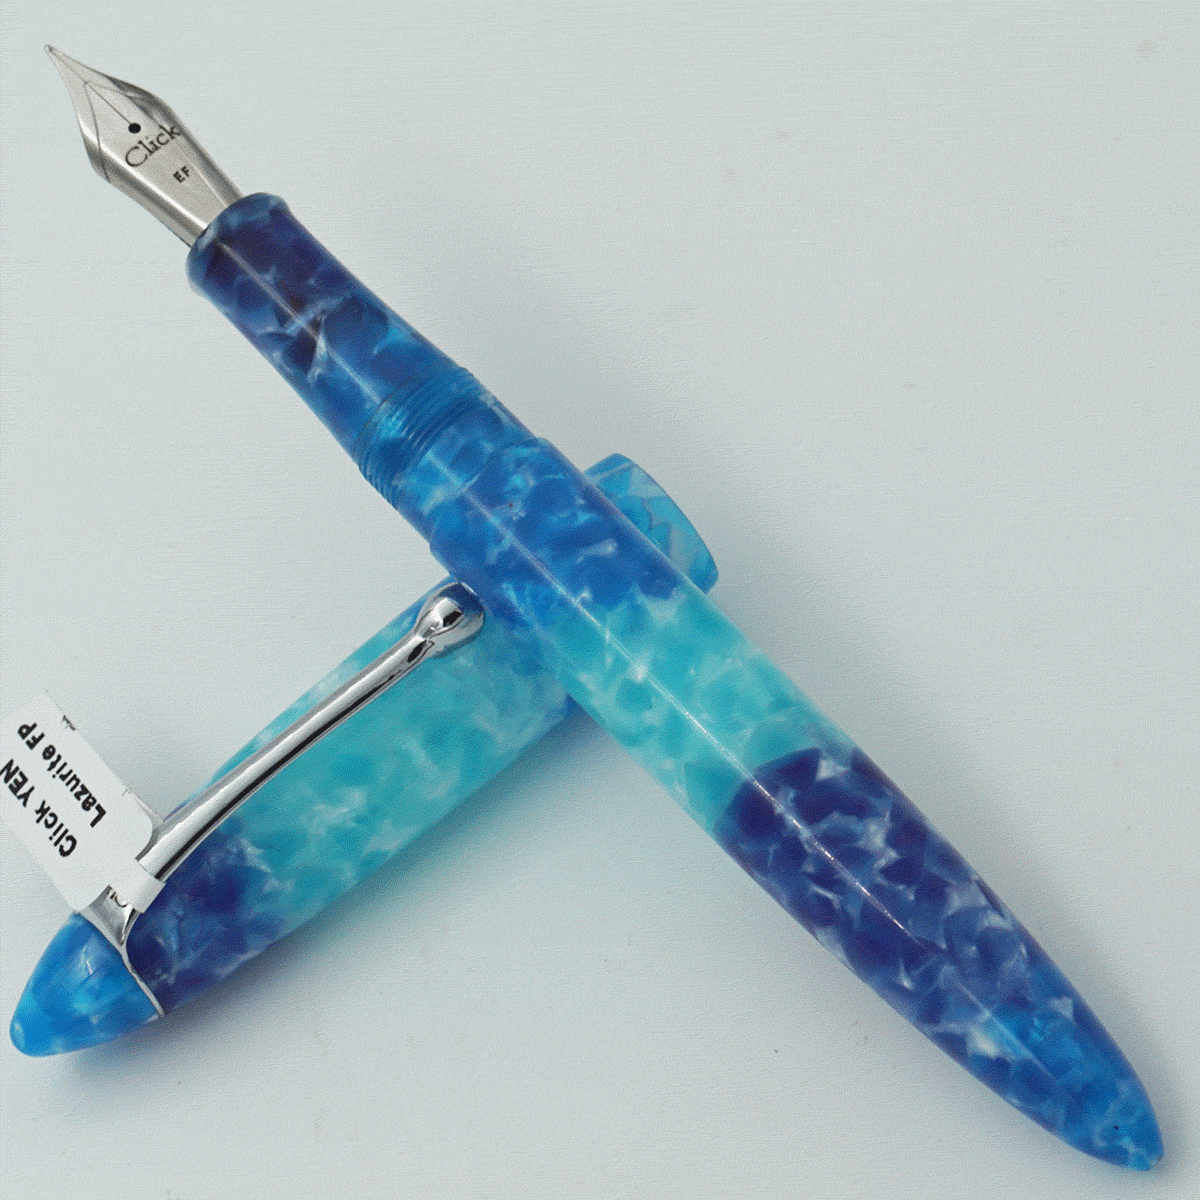 Click YEN Lazurite Sky Blue With Blue Color Acrylic Body And Cap Silver Color Clip No 35 EF Nib  Eye Dropper Model Fountain Pen (3 in 1) (Nib Can be Customised) SKU 24011